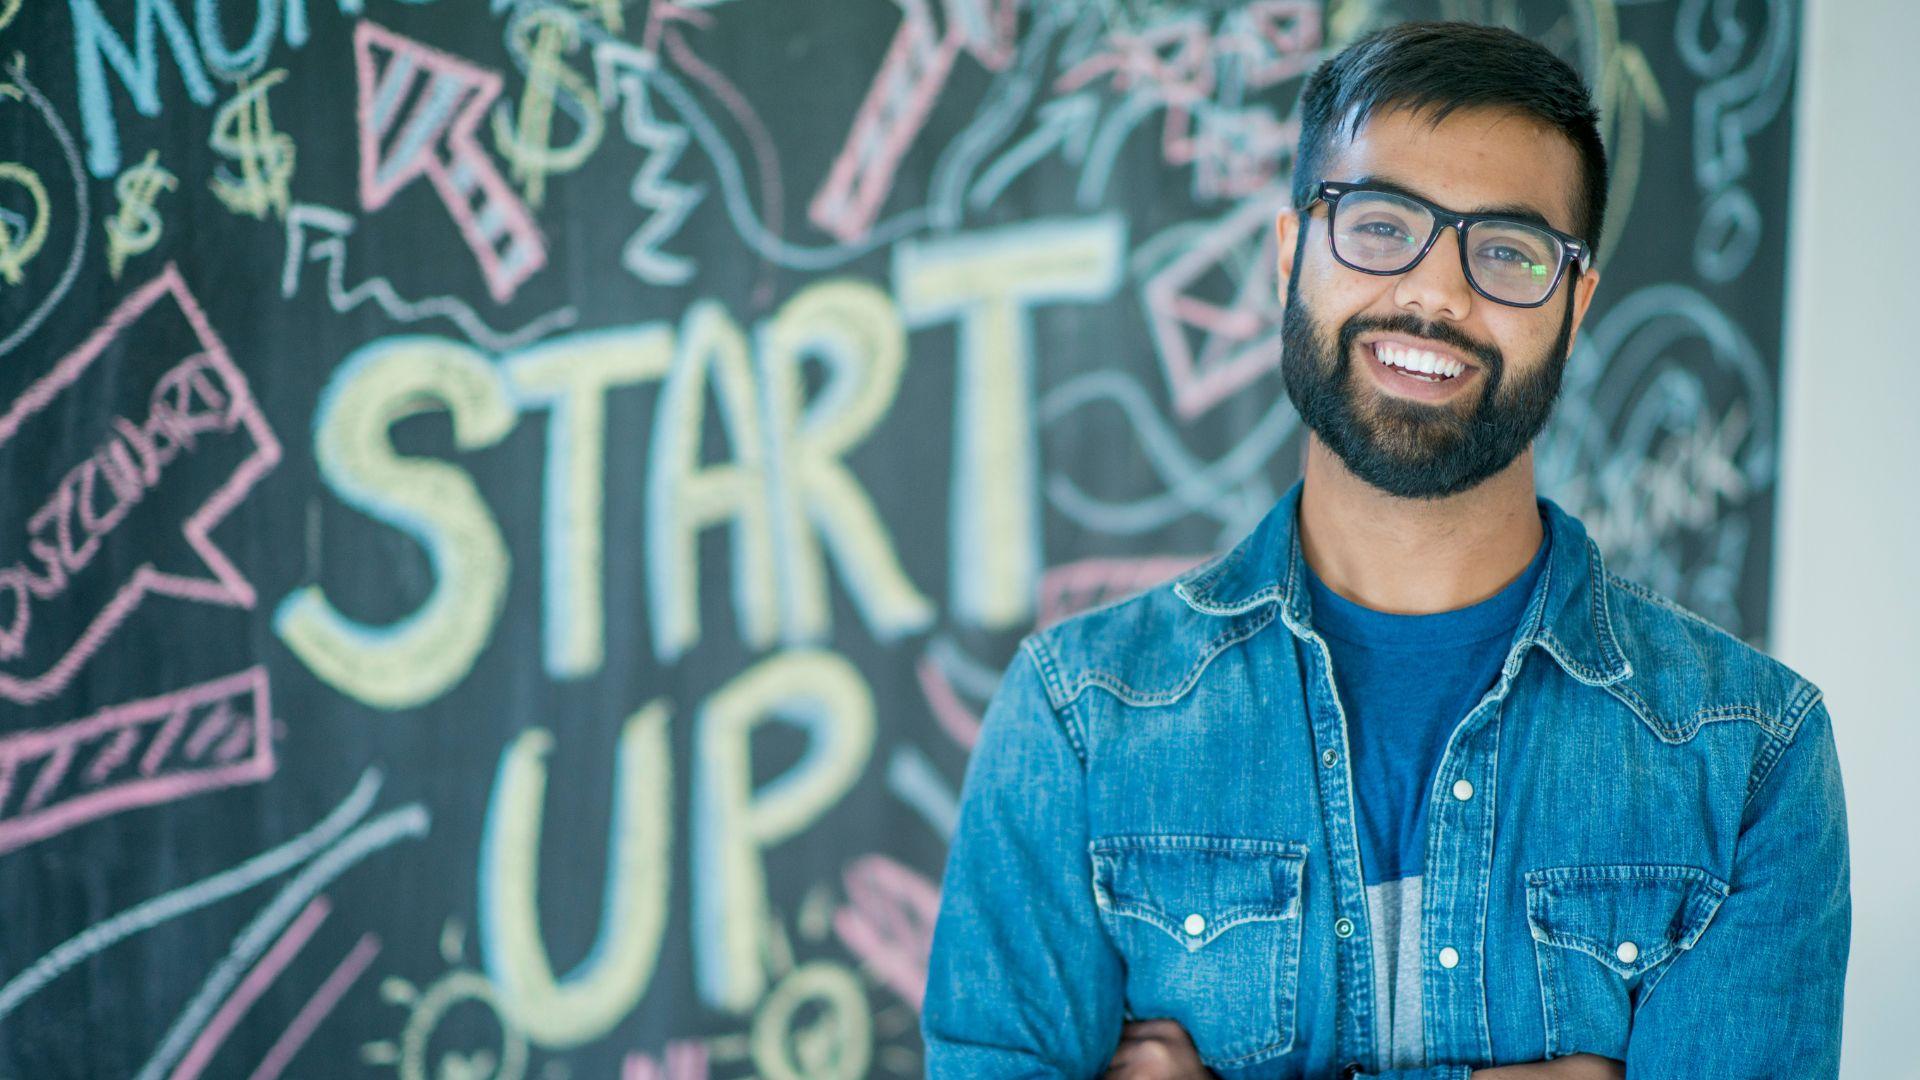 A smiling young man in front of a chalkboard that has 'Start Up' written on it